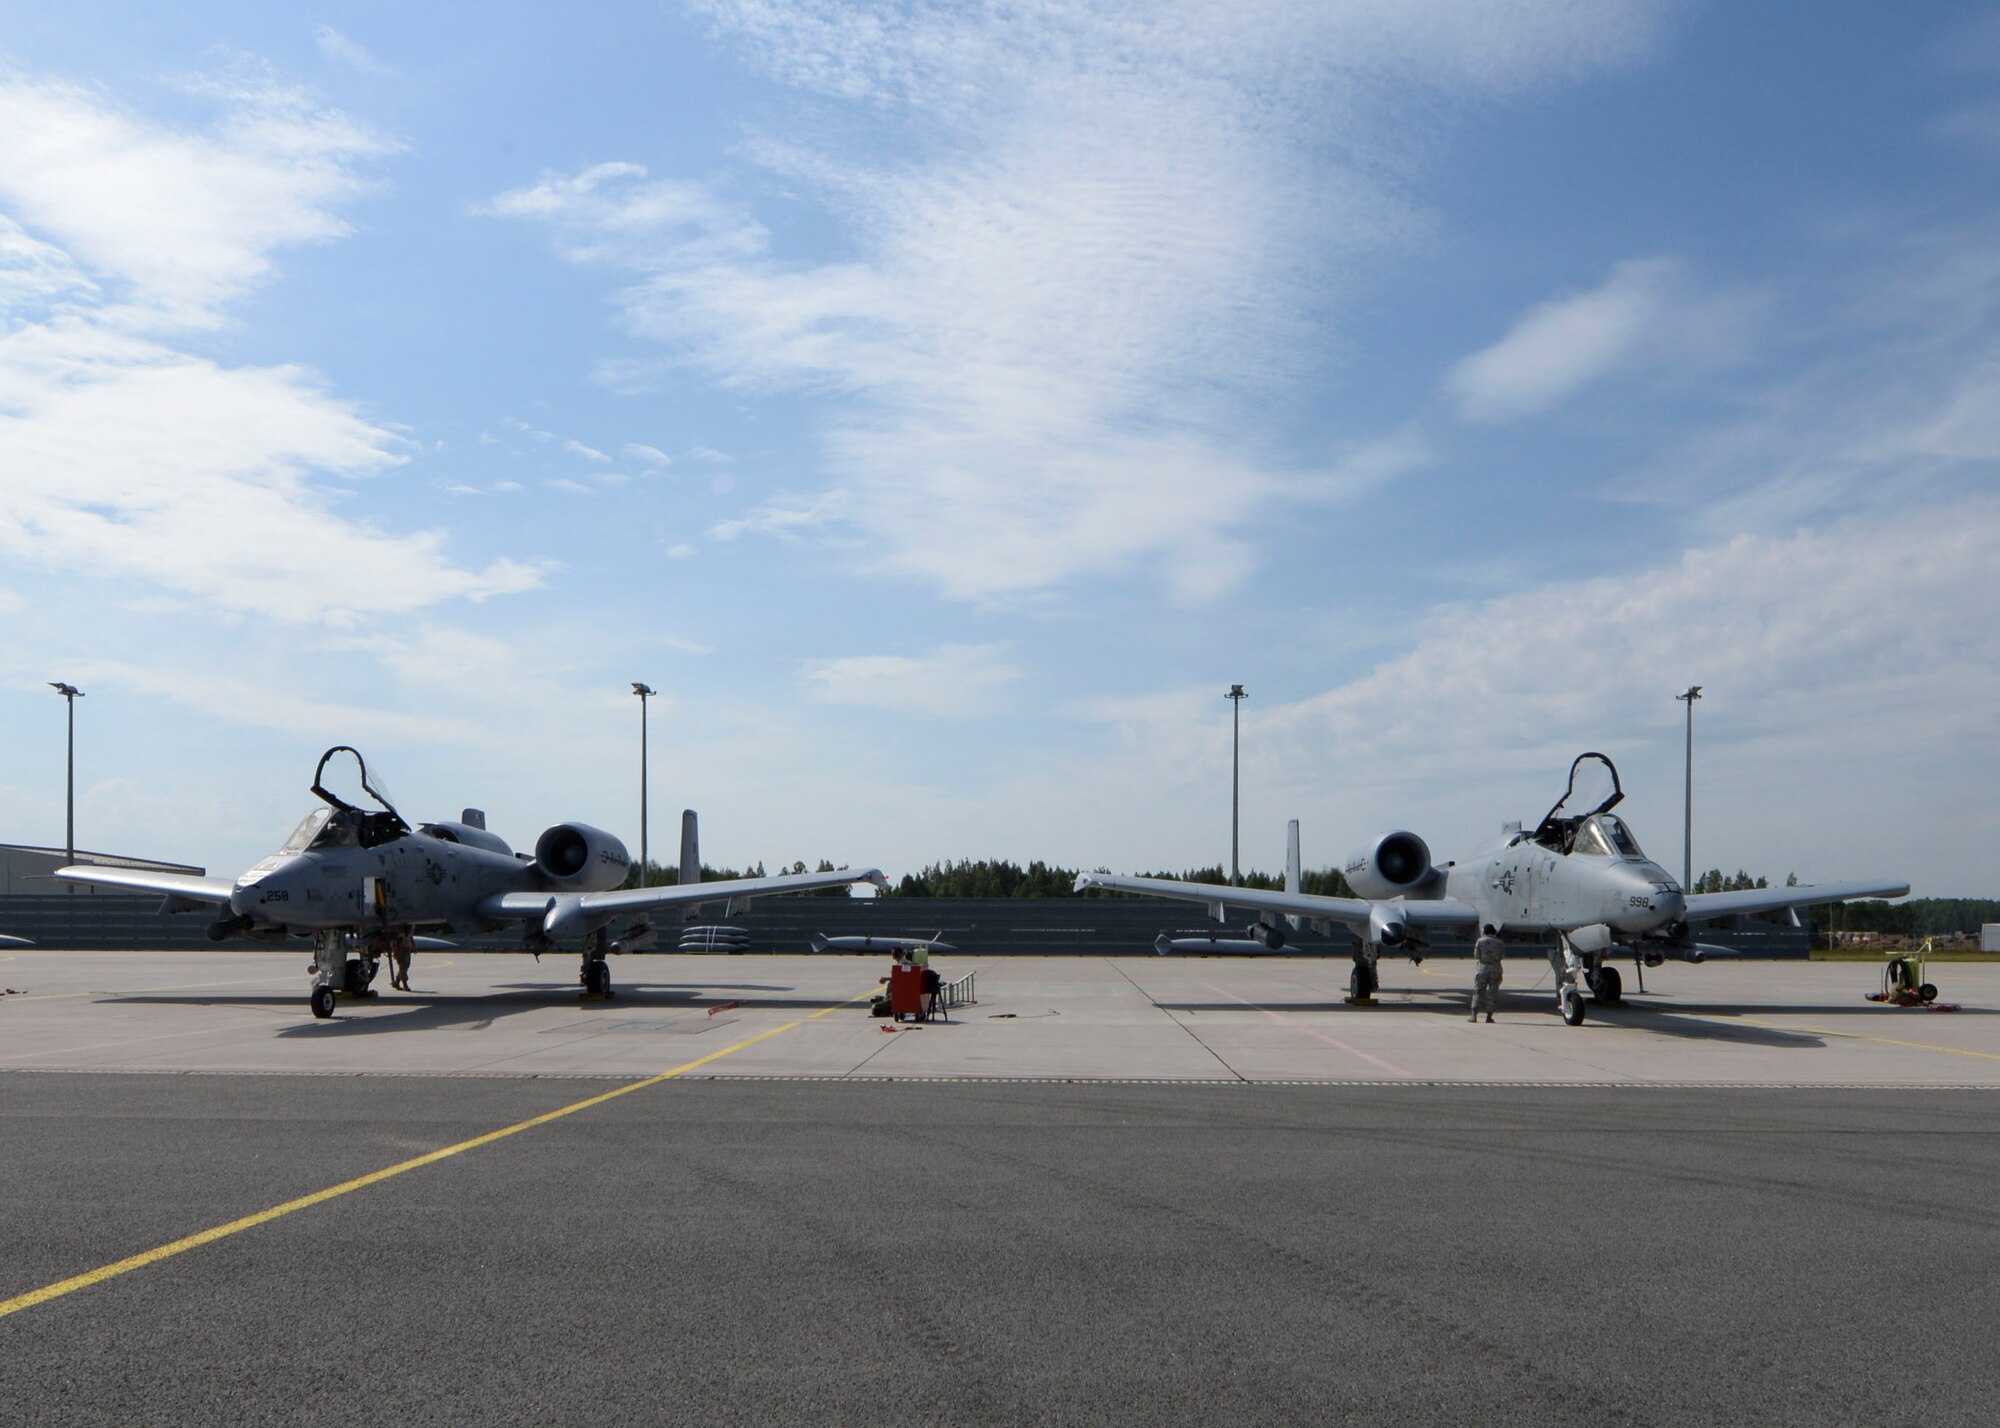 Two A-10 Thunderbolt II aircrafts sit on the flight line at Lielvarde Air Base, Latvia, June 4, 2018. The A-10s were deployed to Europe from the 127th Wing at Selfridge Air National Guard Base, Michigan, to support exercise Saber Strike 18. (U.S. Air Force photo by Staff Sgt. Jimmie D. Pike)